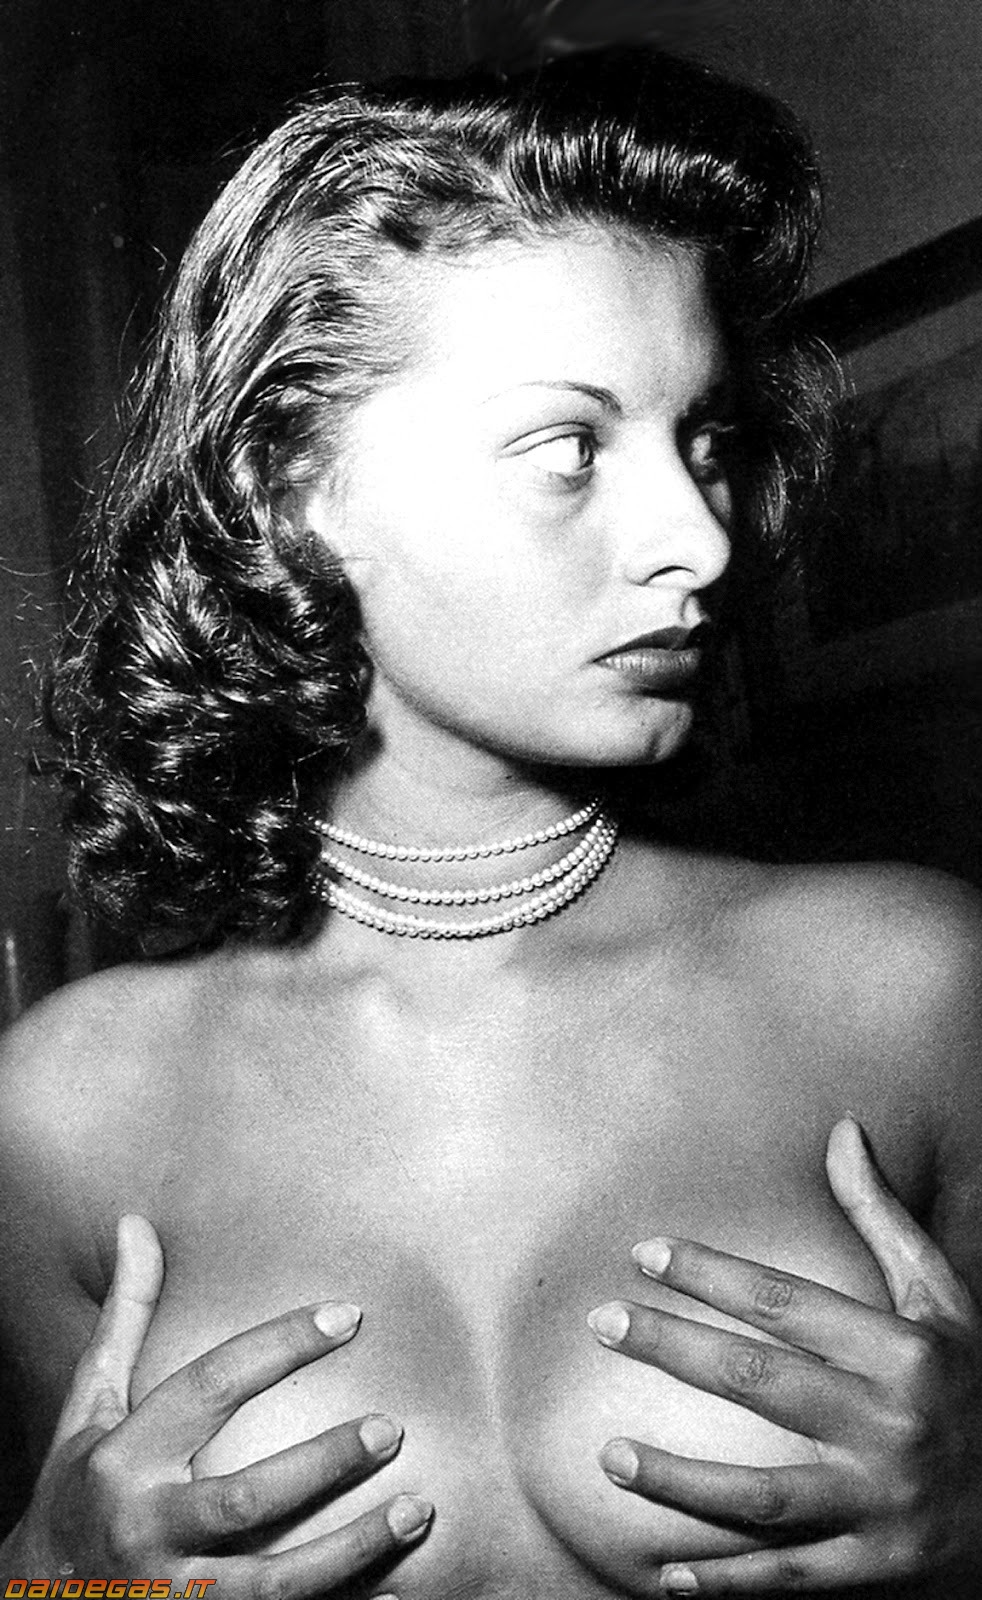 1girl black_and_white breasts female hand_bra jewelry large_breasts lipstick looking_away makeup necklace no_bra sophia_loren